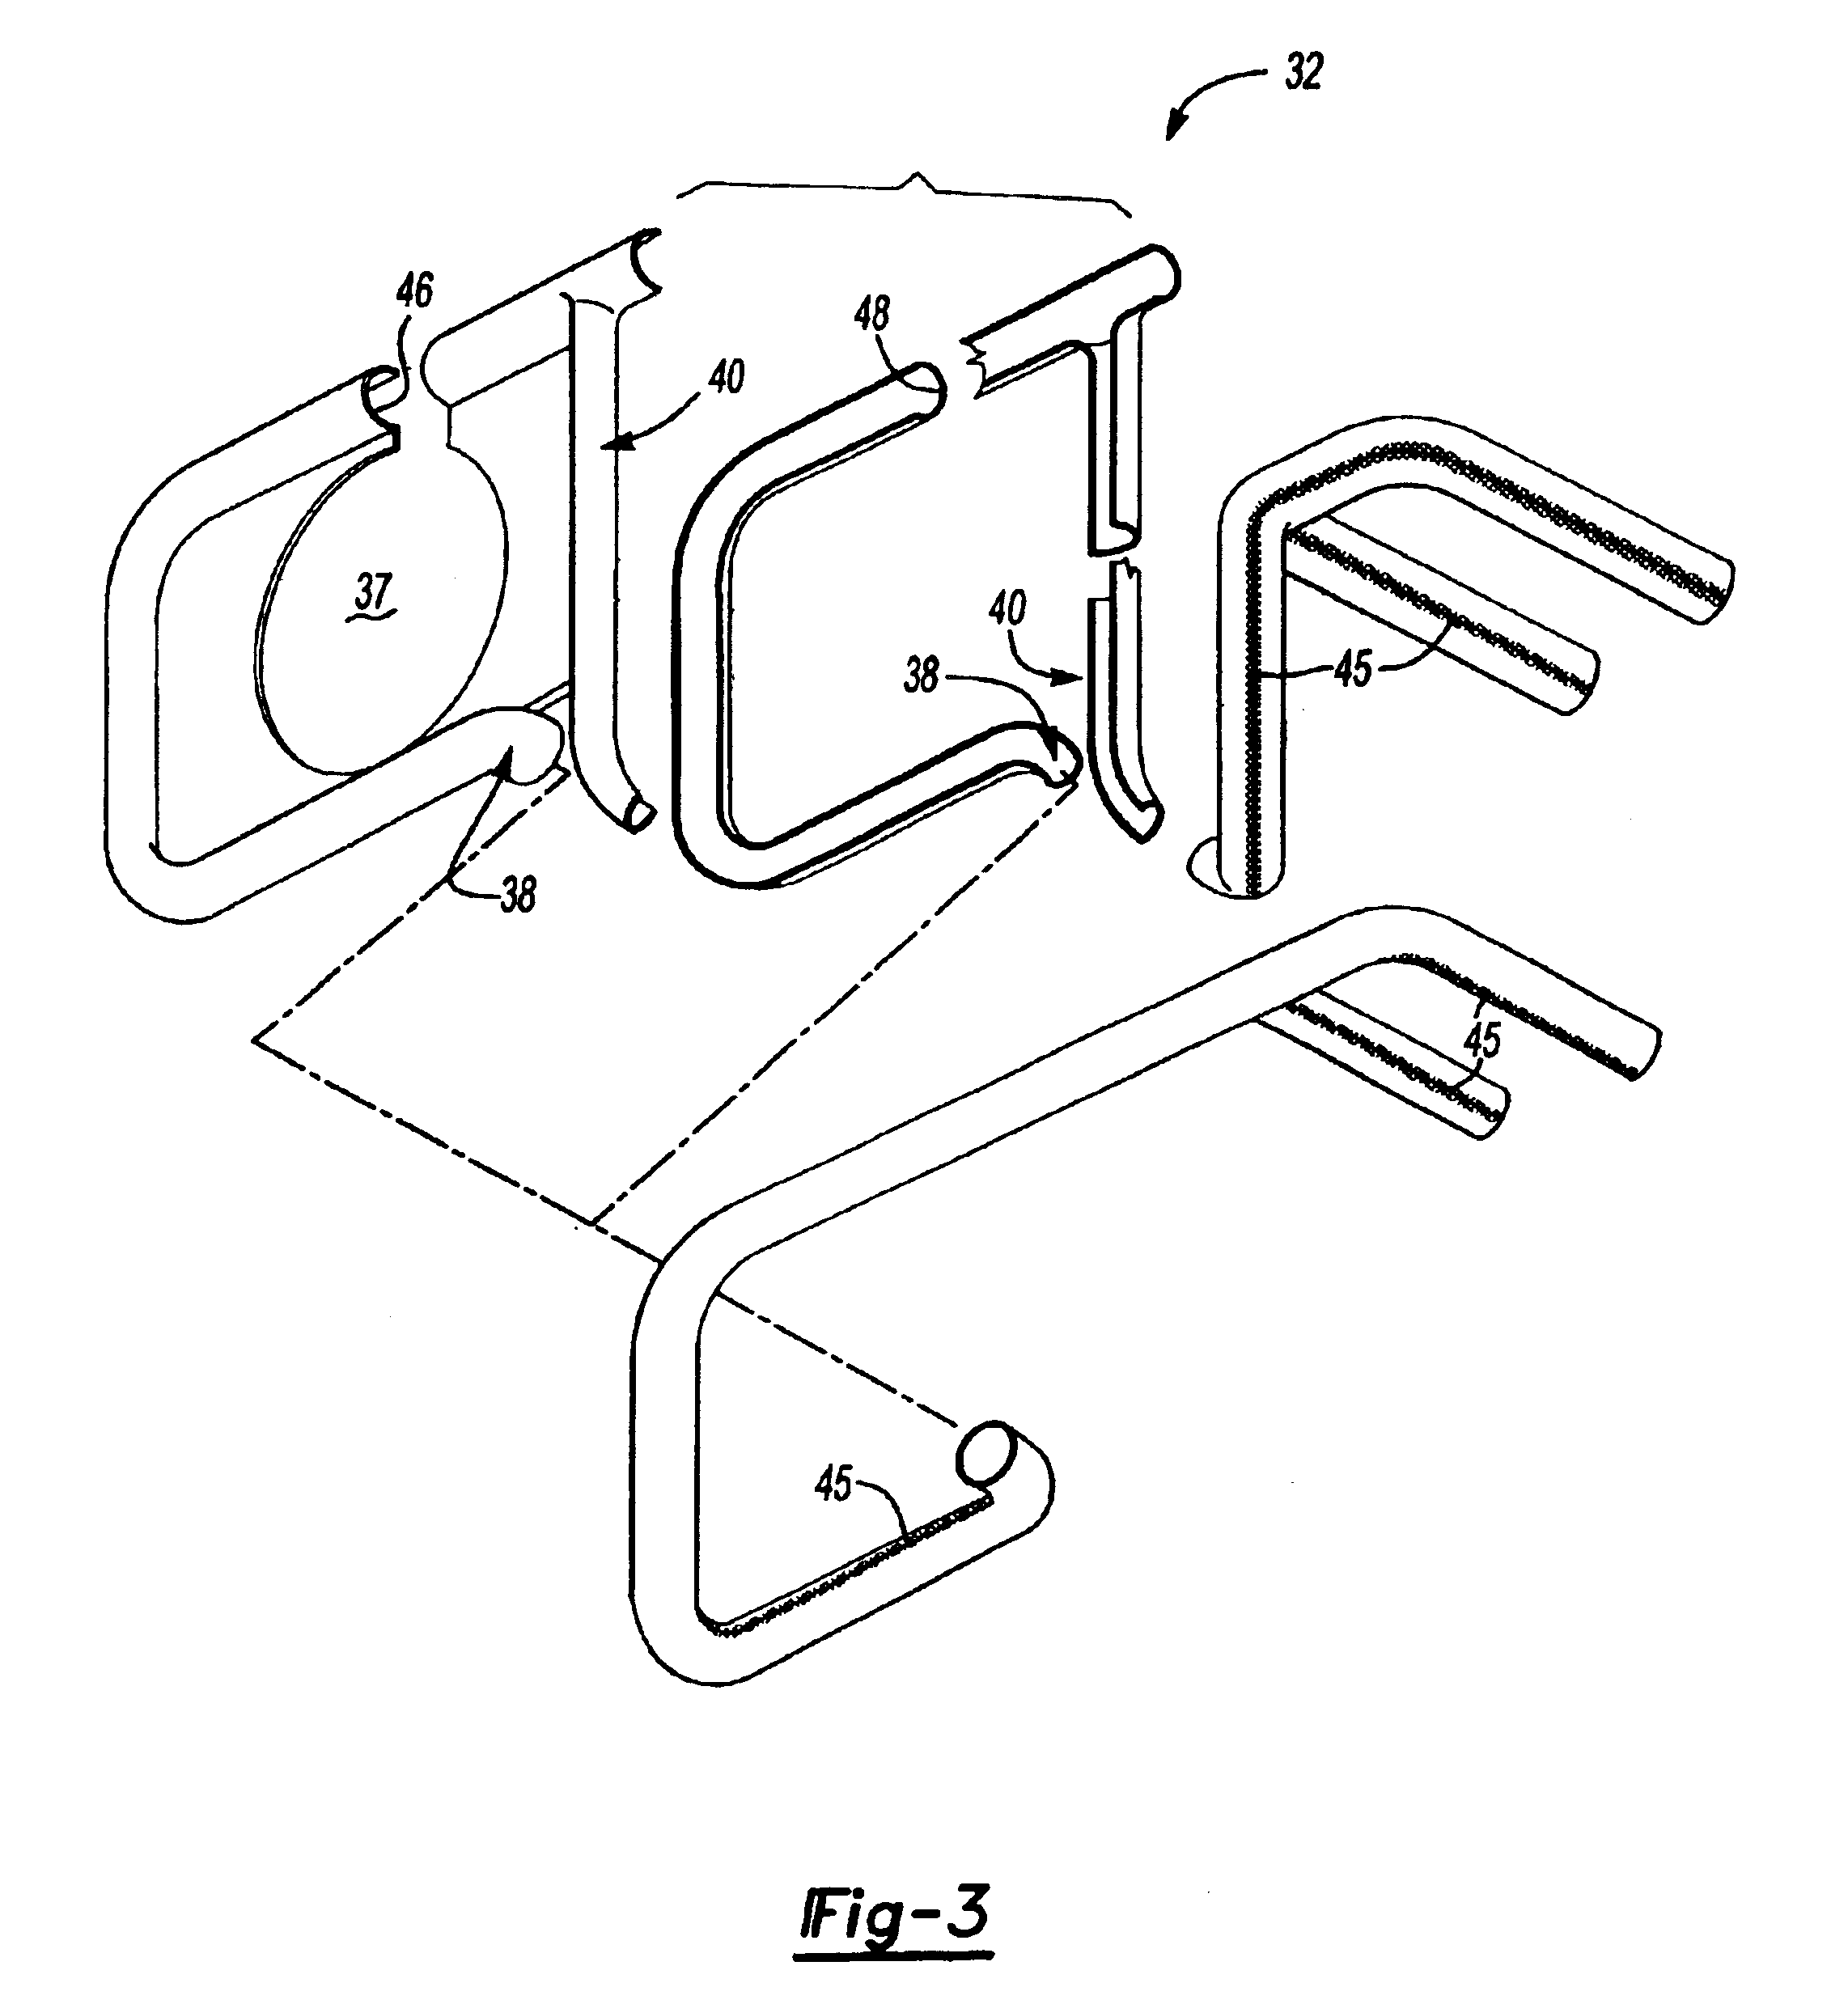 Integrated engine compartment component and air intake system